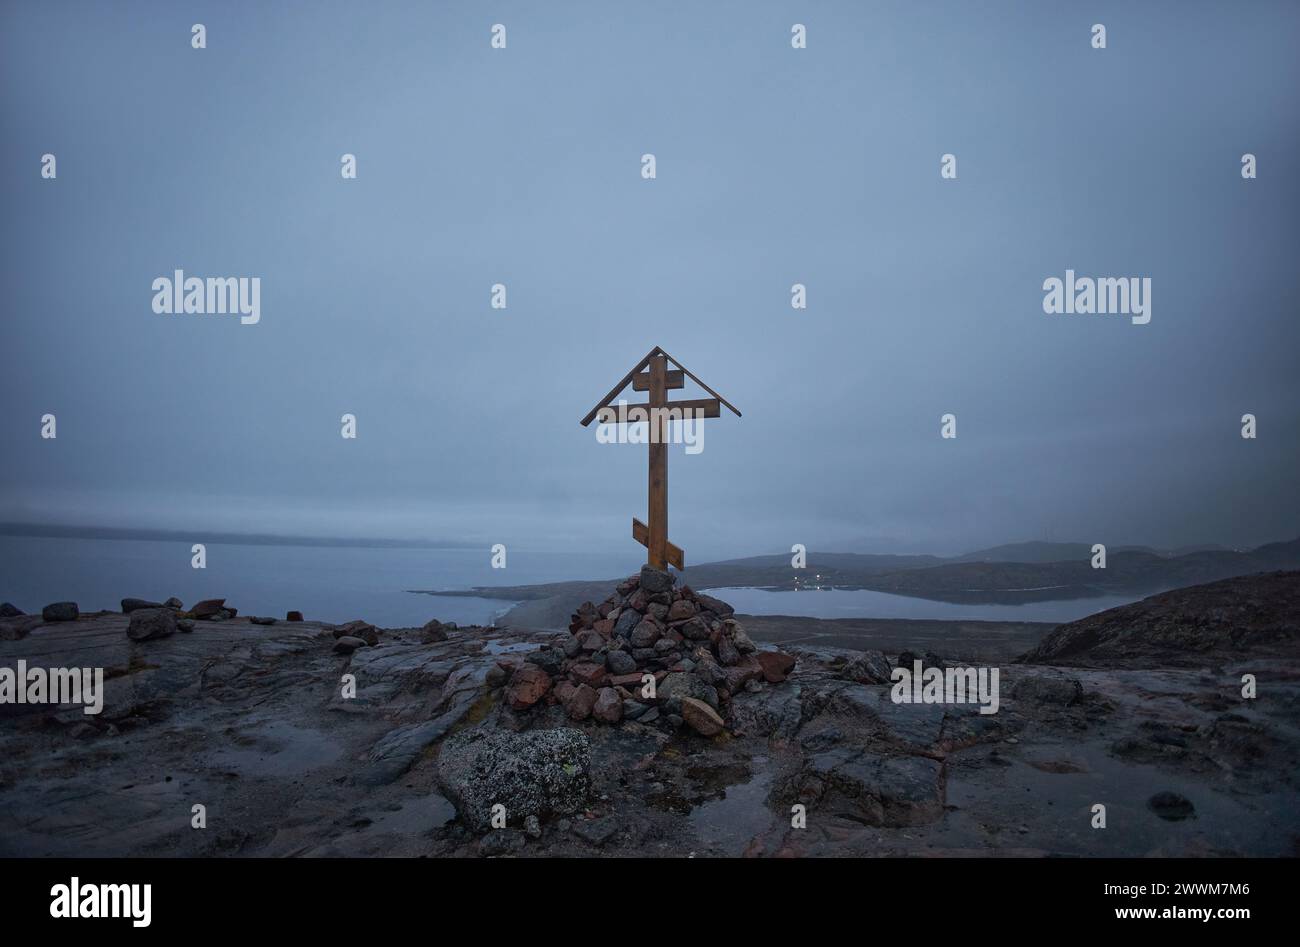 Simple wooden cross atop a rocky hill, with a foggy coastal backdrop under the evening sky Stock Photo